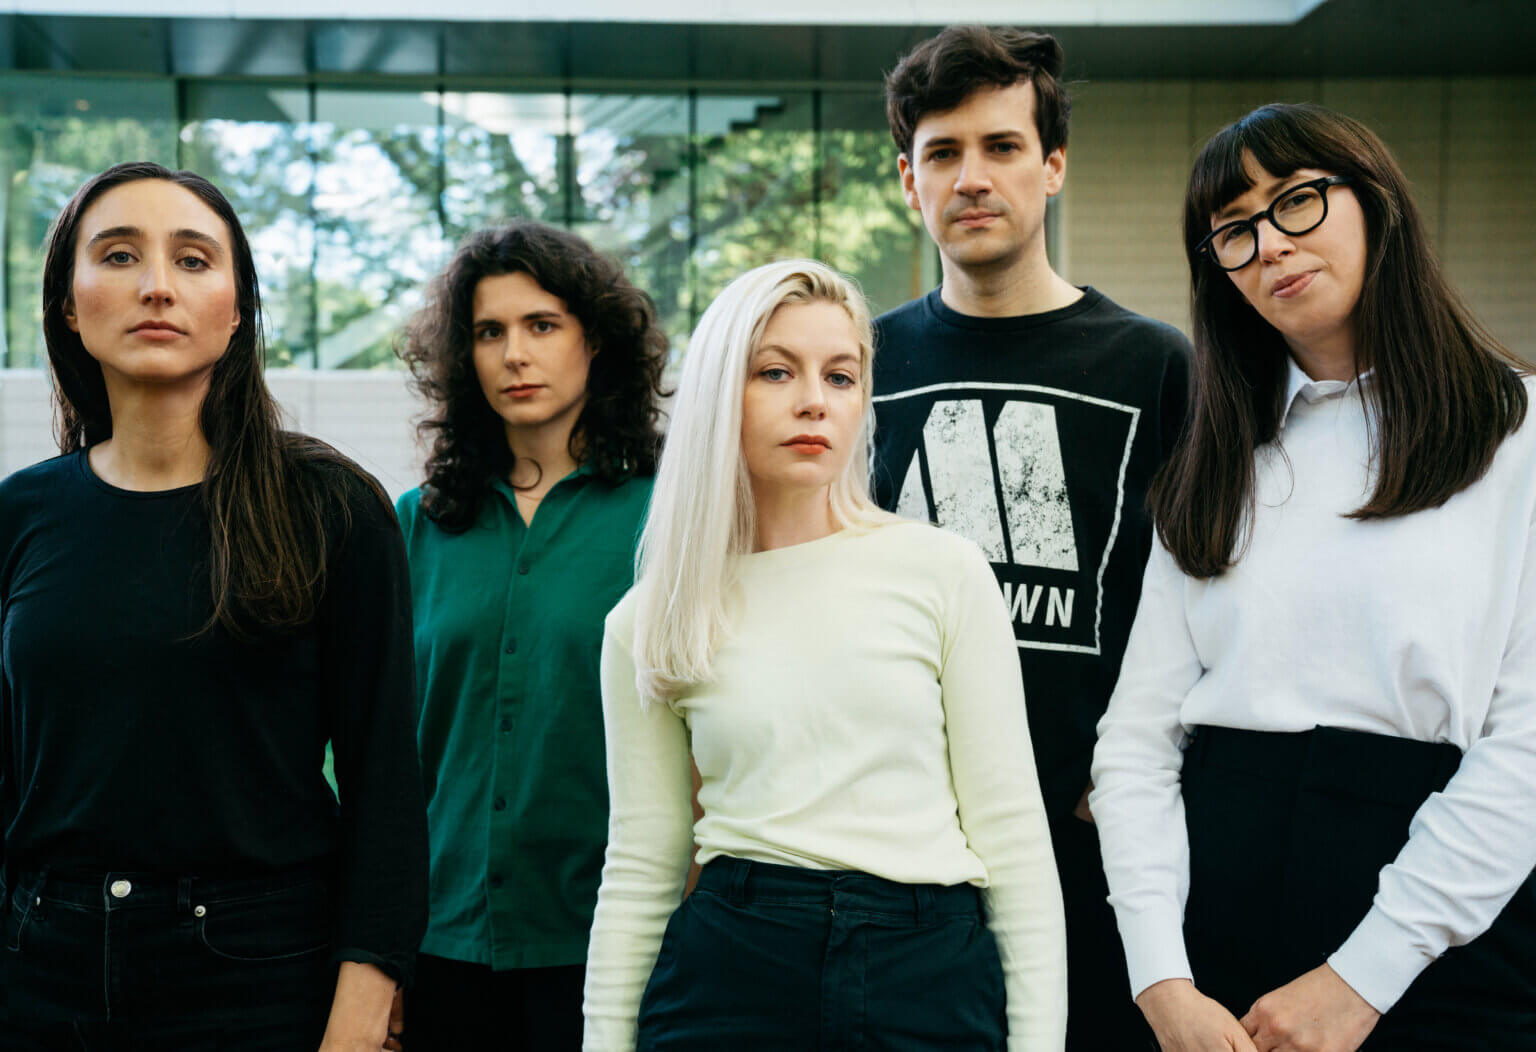 Alvvays have announce their New LP Blue Rev, will drop on October 7, via Polyvinyl, with the news they have shared Lead single "Pharmacist"